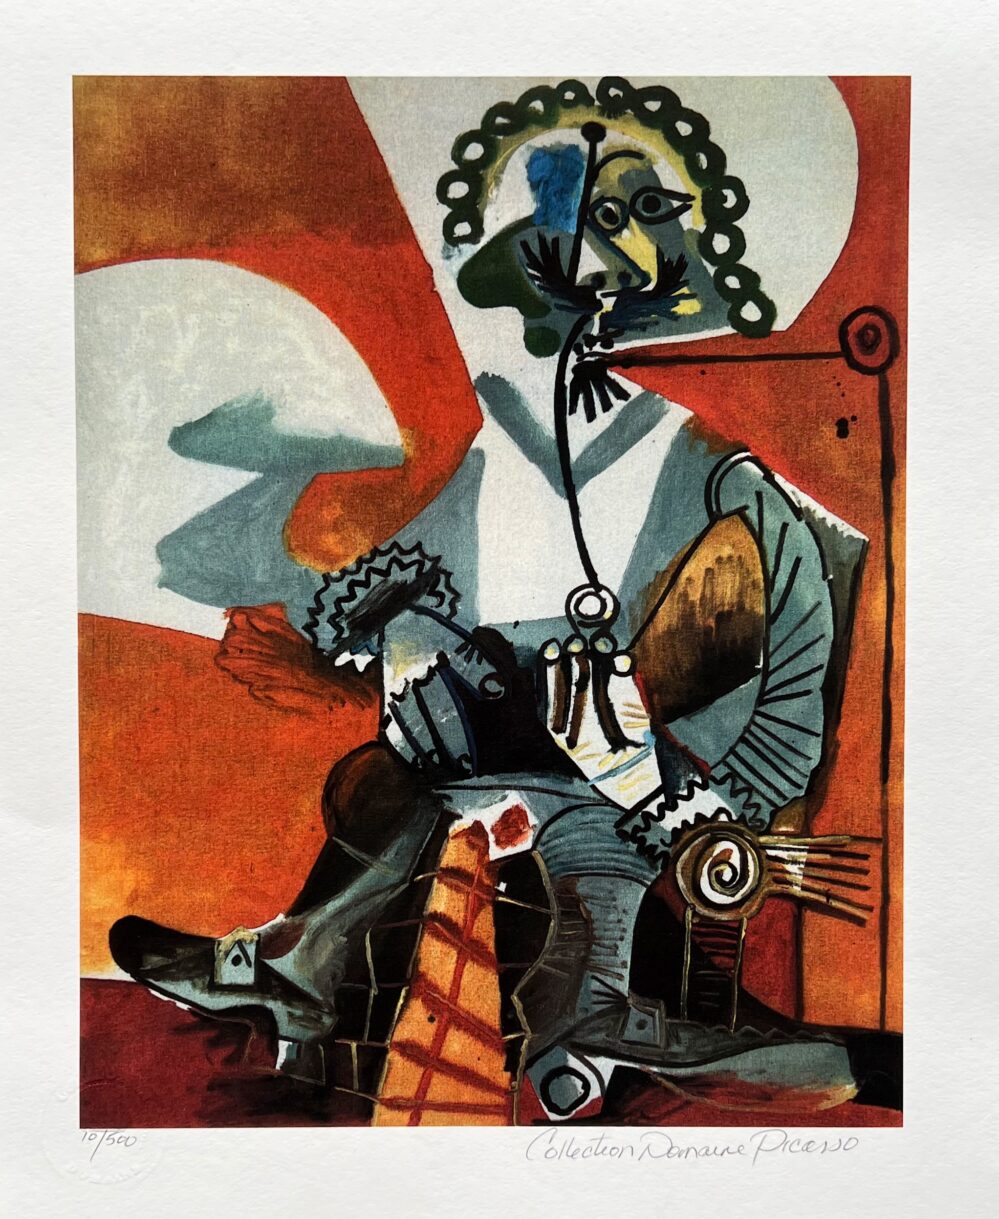 #103 BUCKLED SHOE MAN Pablo Picasso Estate Signed Giclee